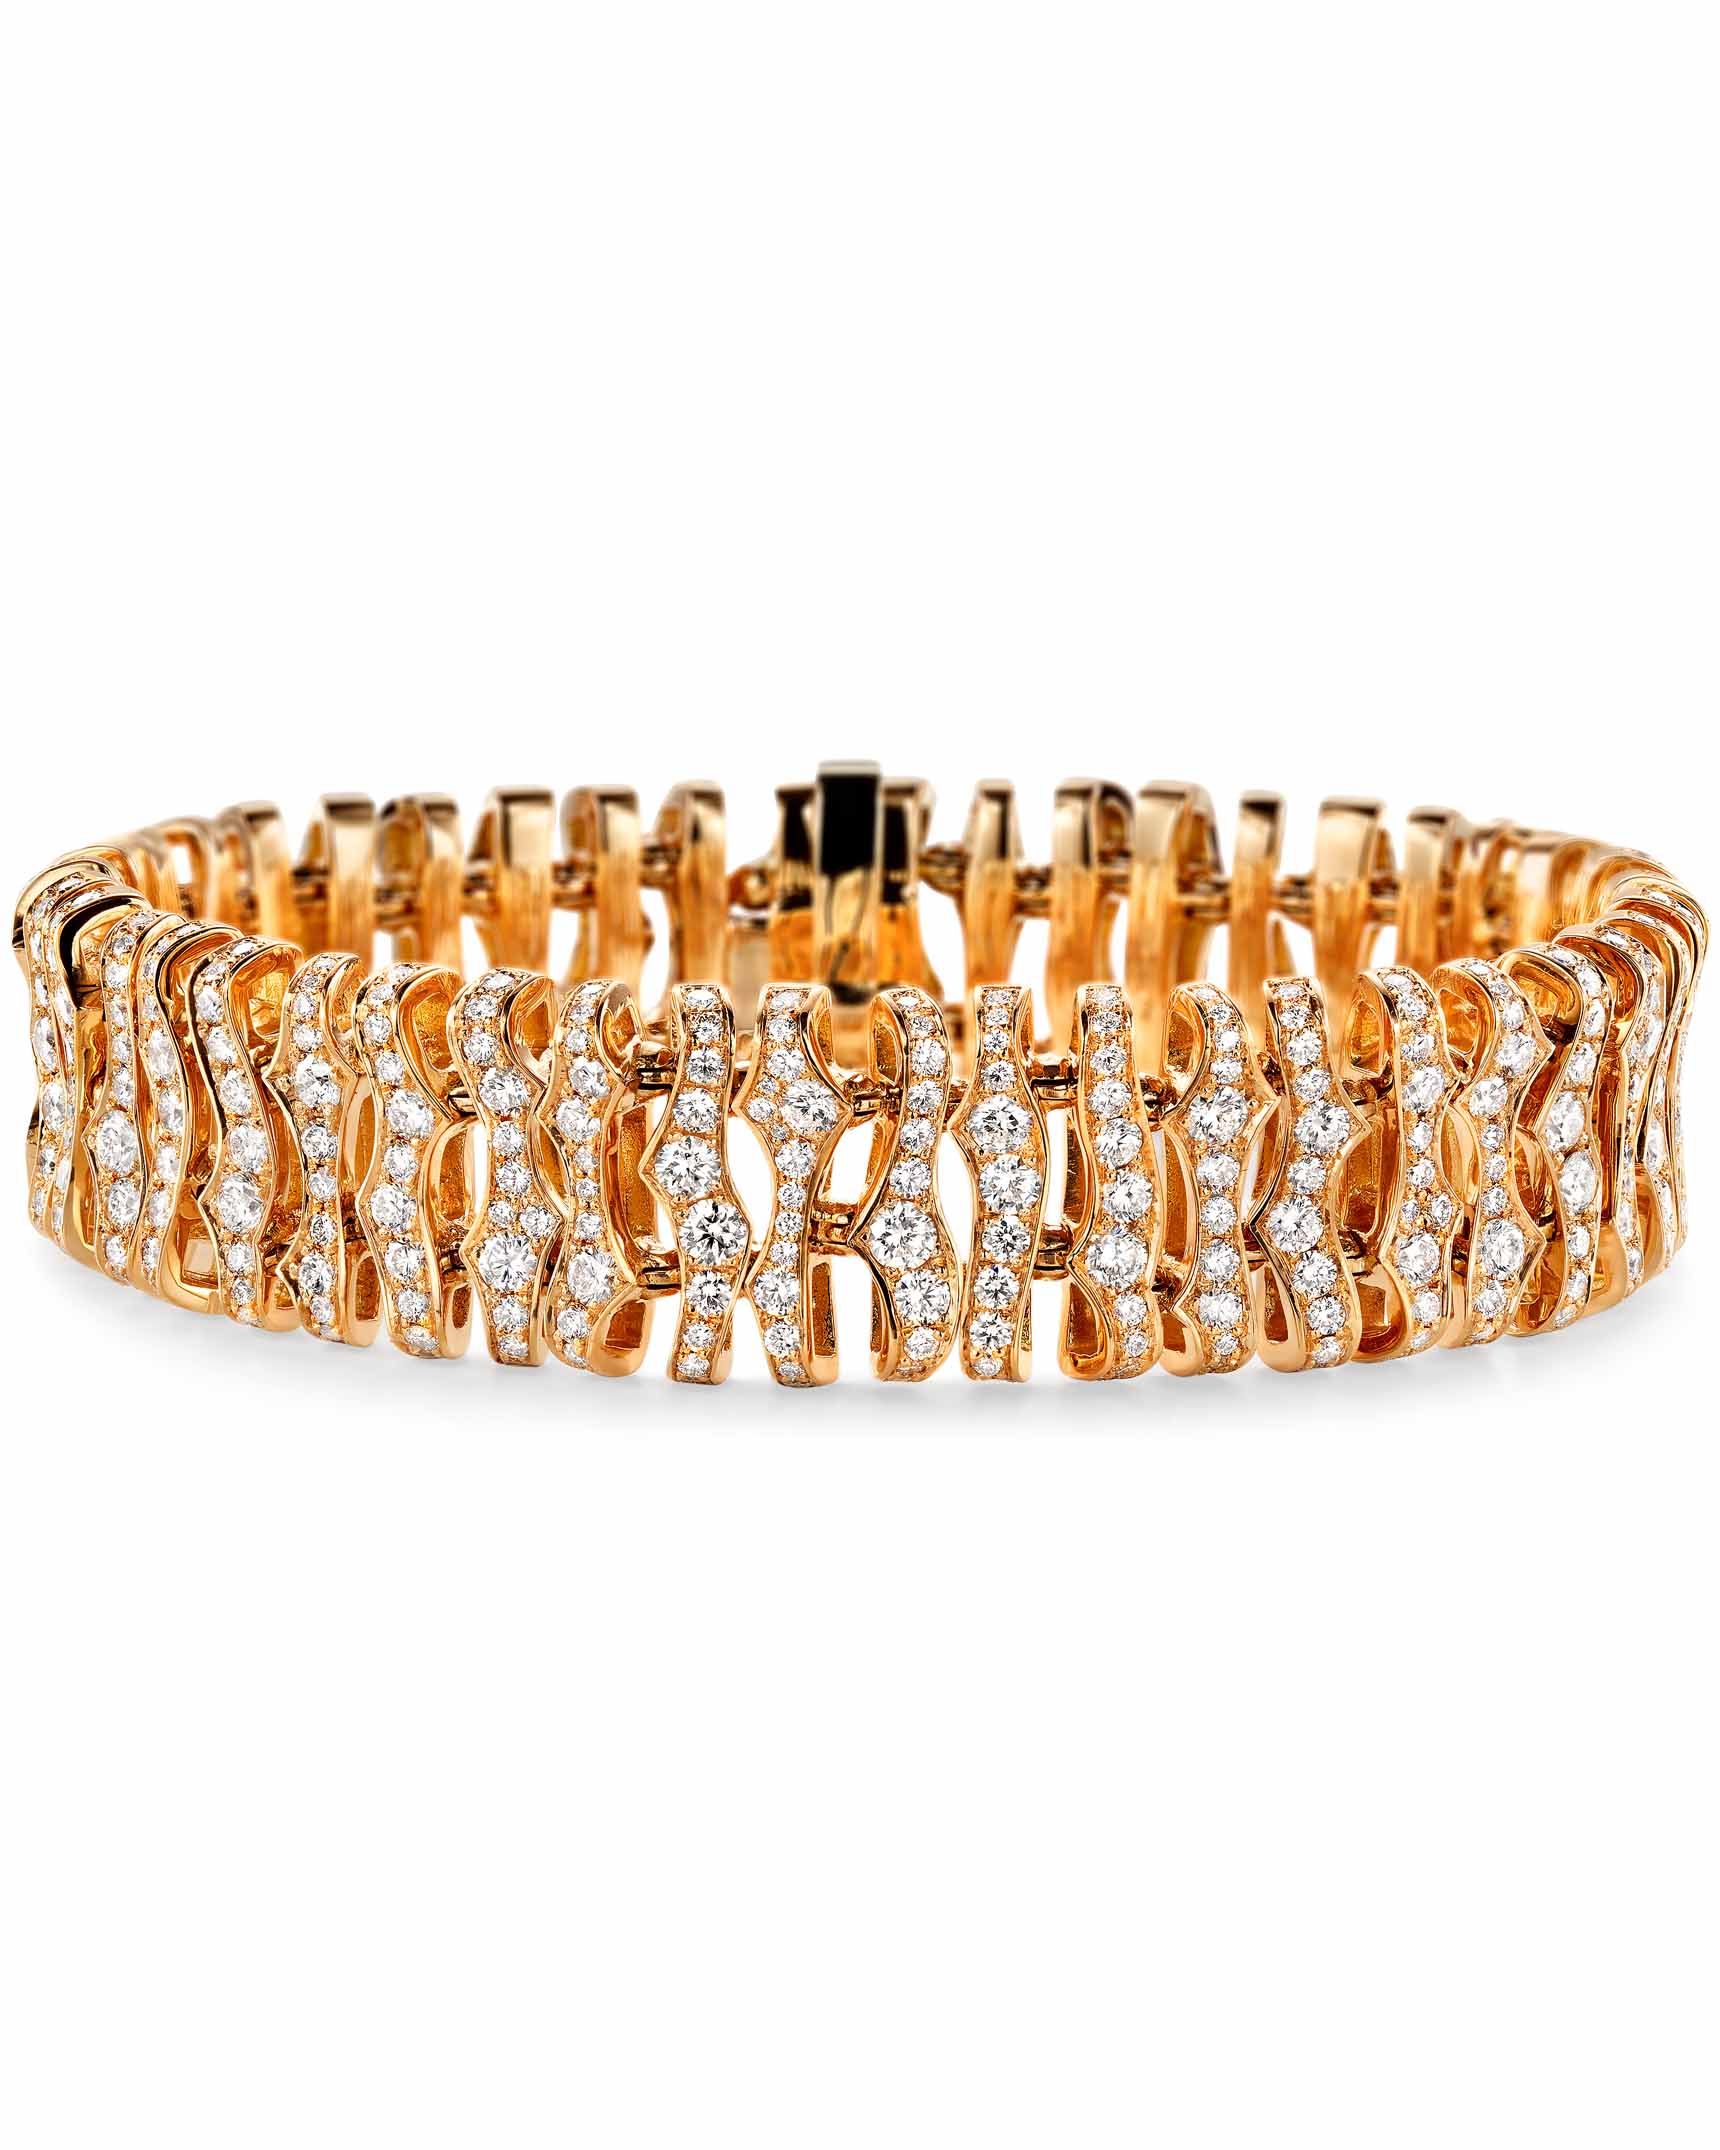 8 Gram Gold Bangles - These 15 Stylish Designs are Trending Now